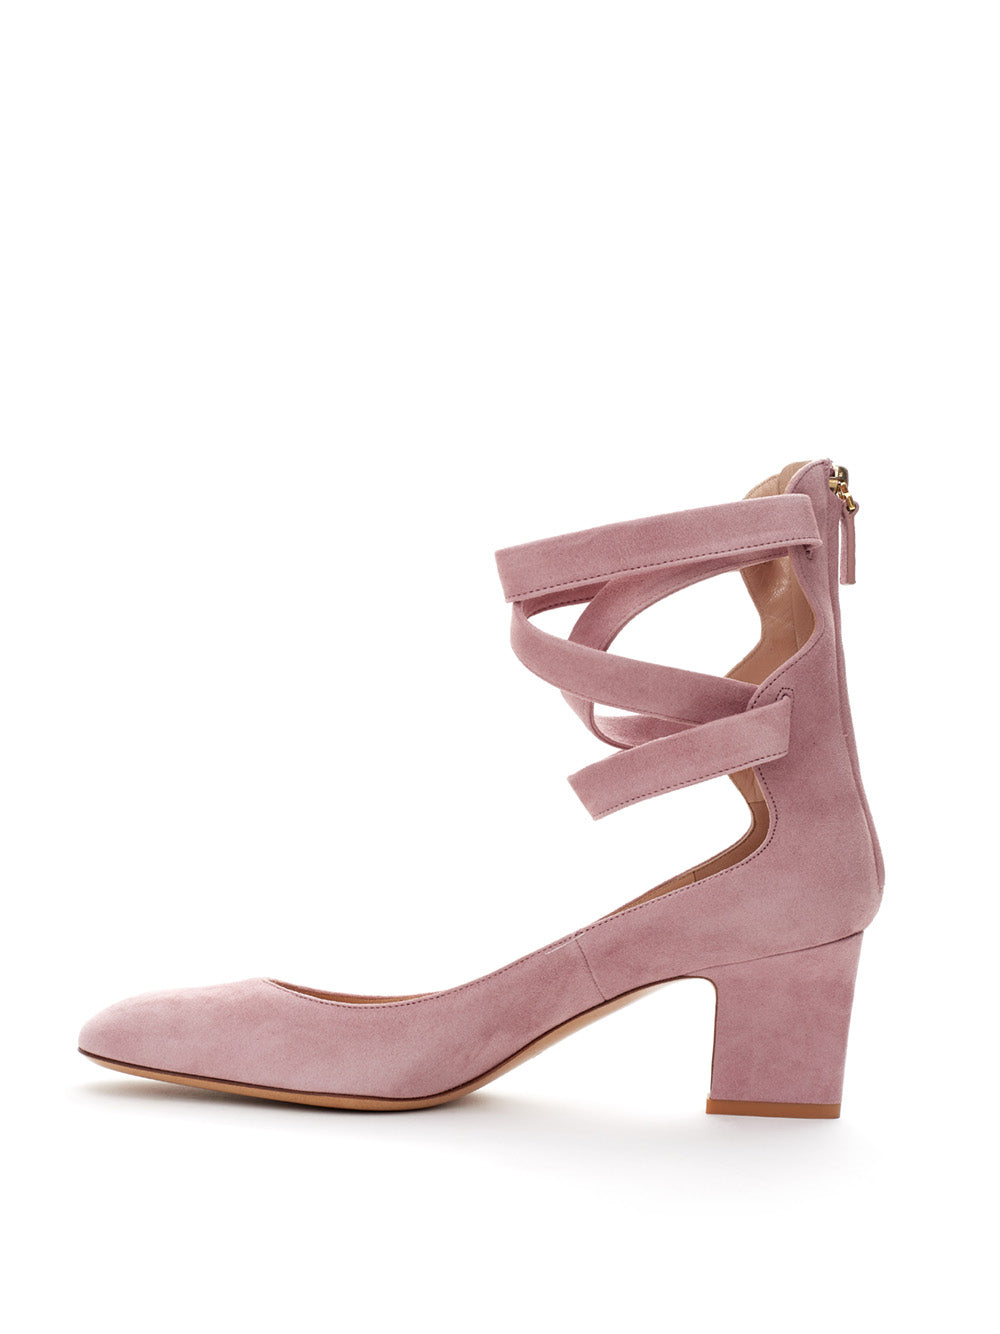 Valentino Ankle Strap Suede Sandals